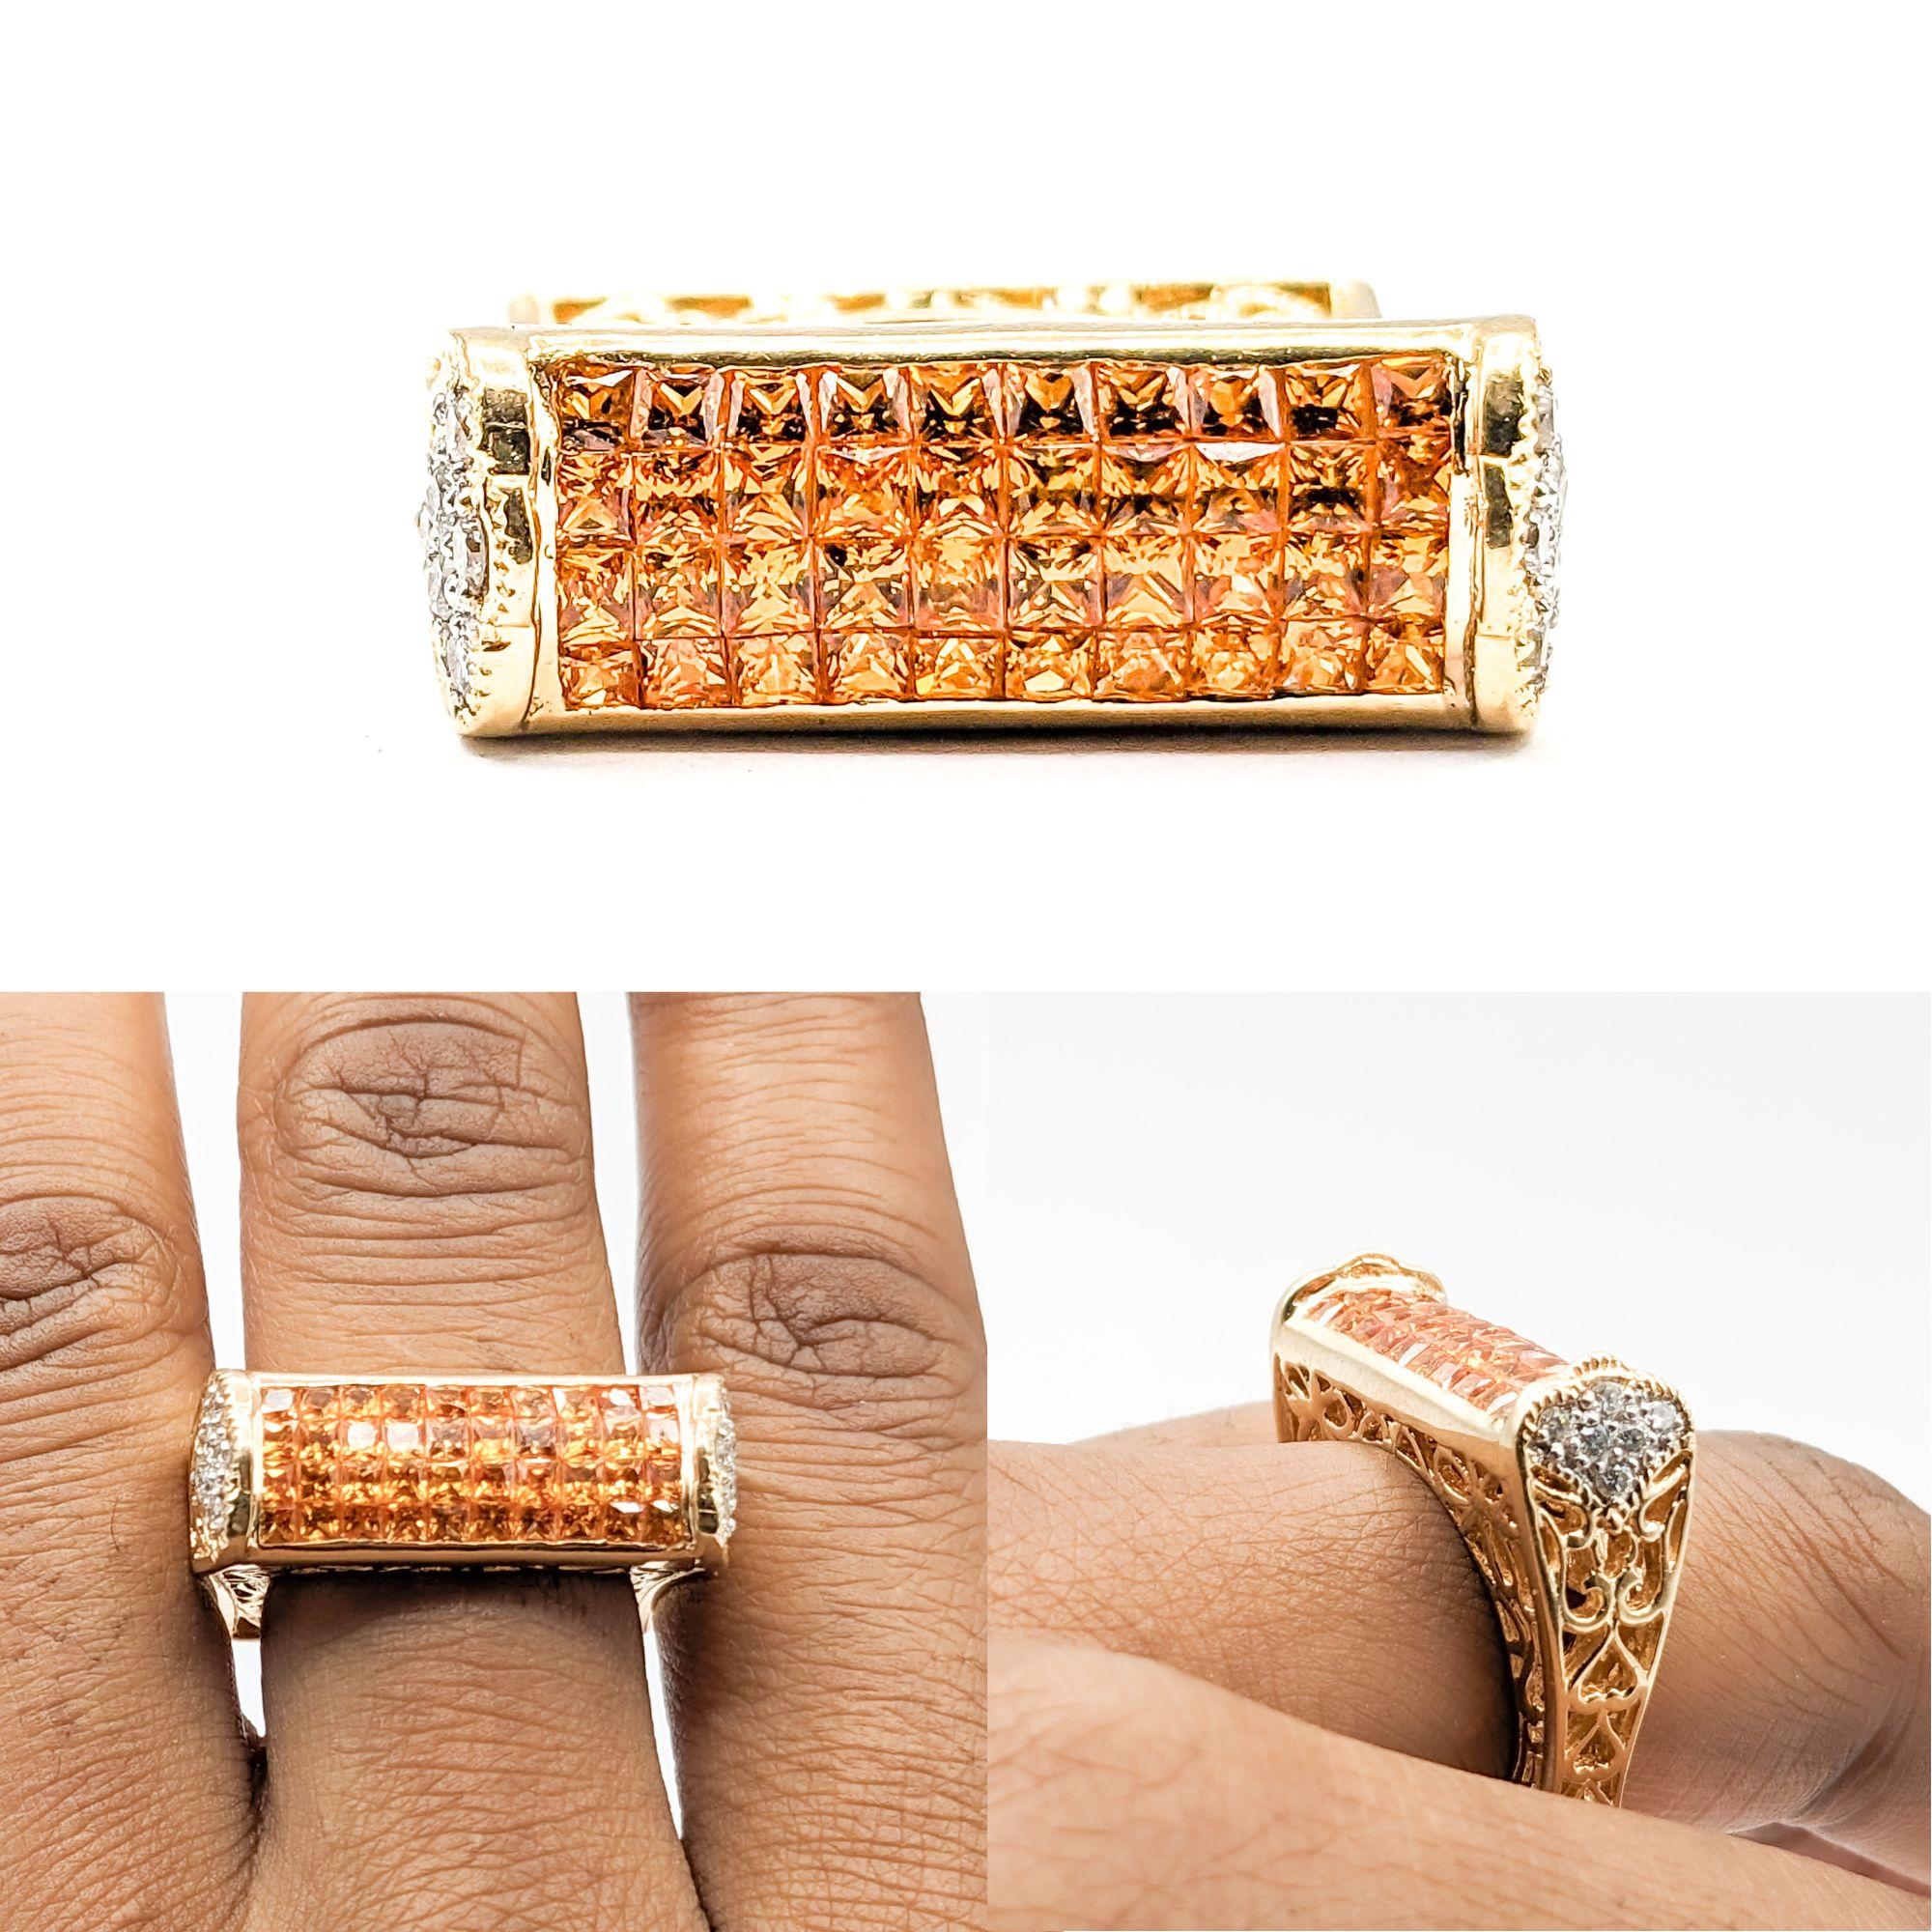 2.40ctw Orange Sapphires & .20ctw Diamond Ring In Yellow Gold

This exquisite gemstone fashion ring, crafted in radiant 14kt yellow gold, presents a striking 2.40ctw orange sapphires centerpiece, brilliantly accented by .20ctw of round diamonds. The